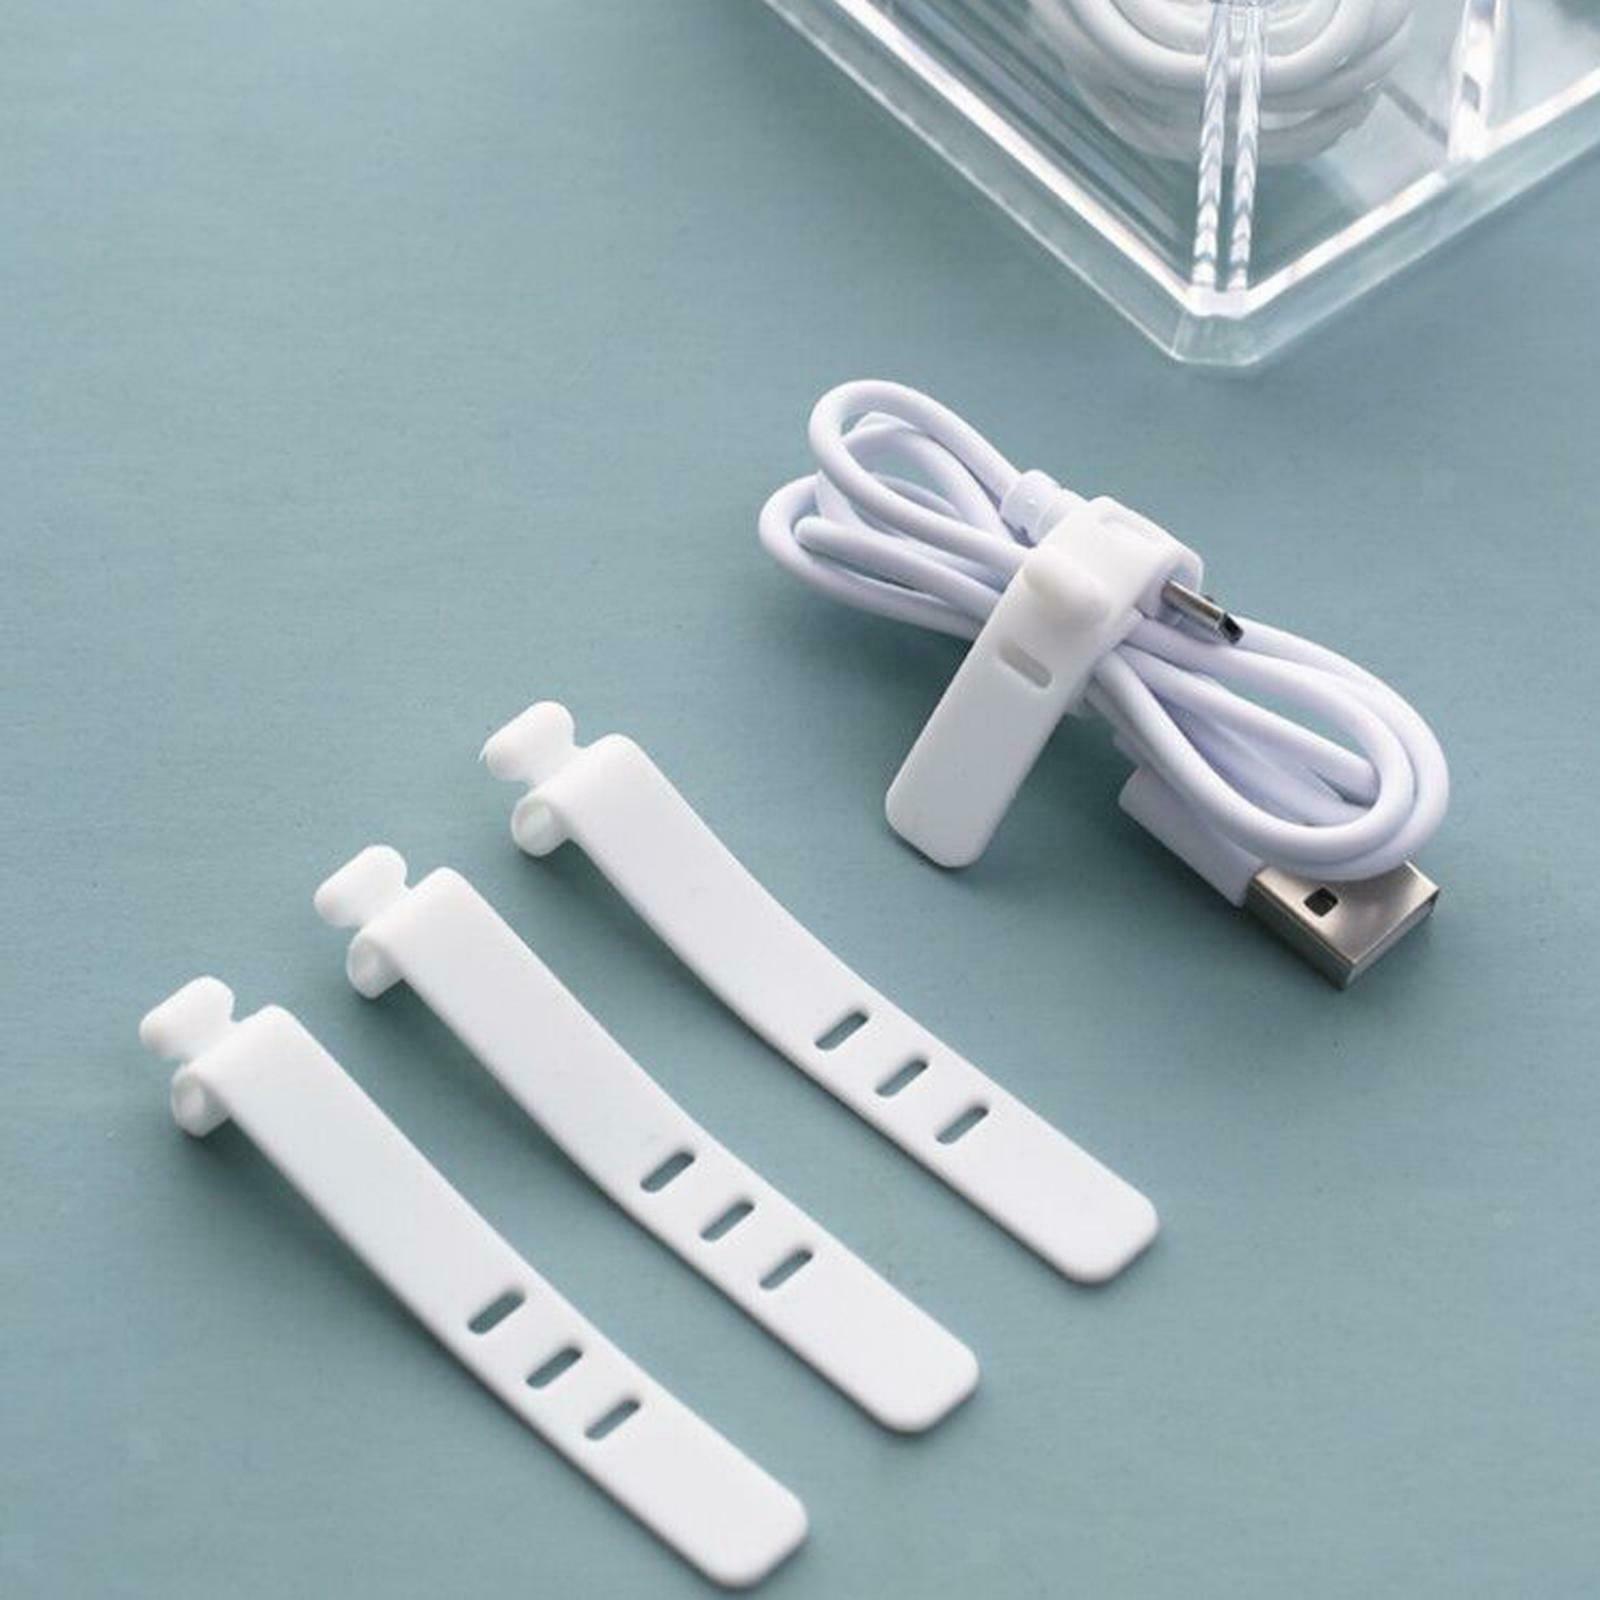 10Pcs Silicone Cable Ties 3 Holes Holder for Data Cable Cord Cables Desk